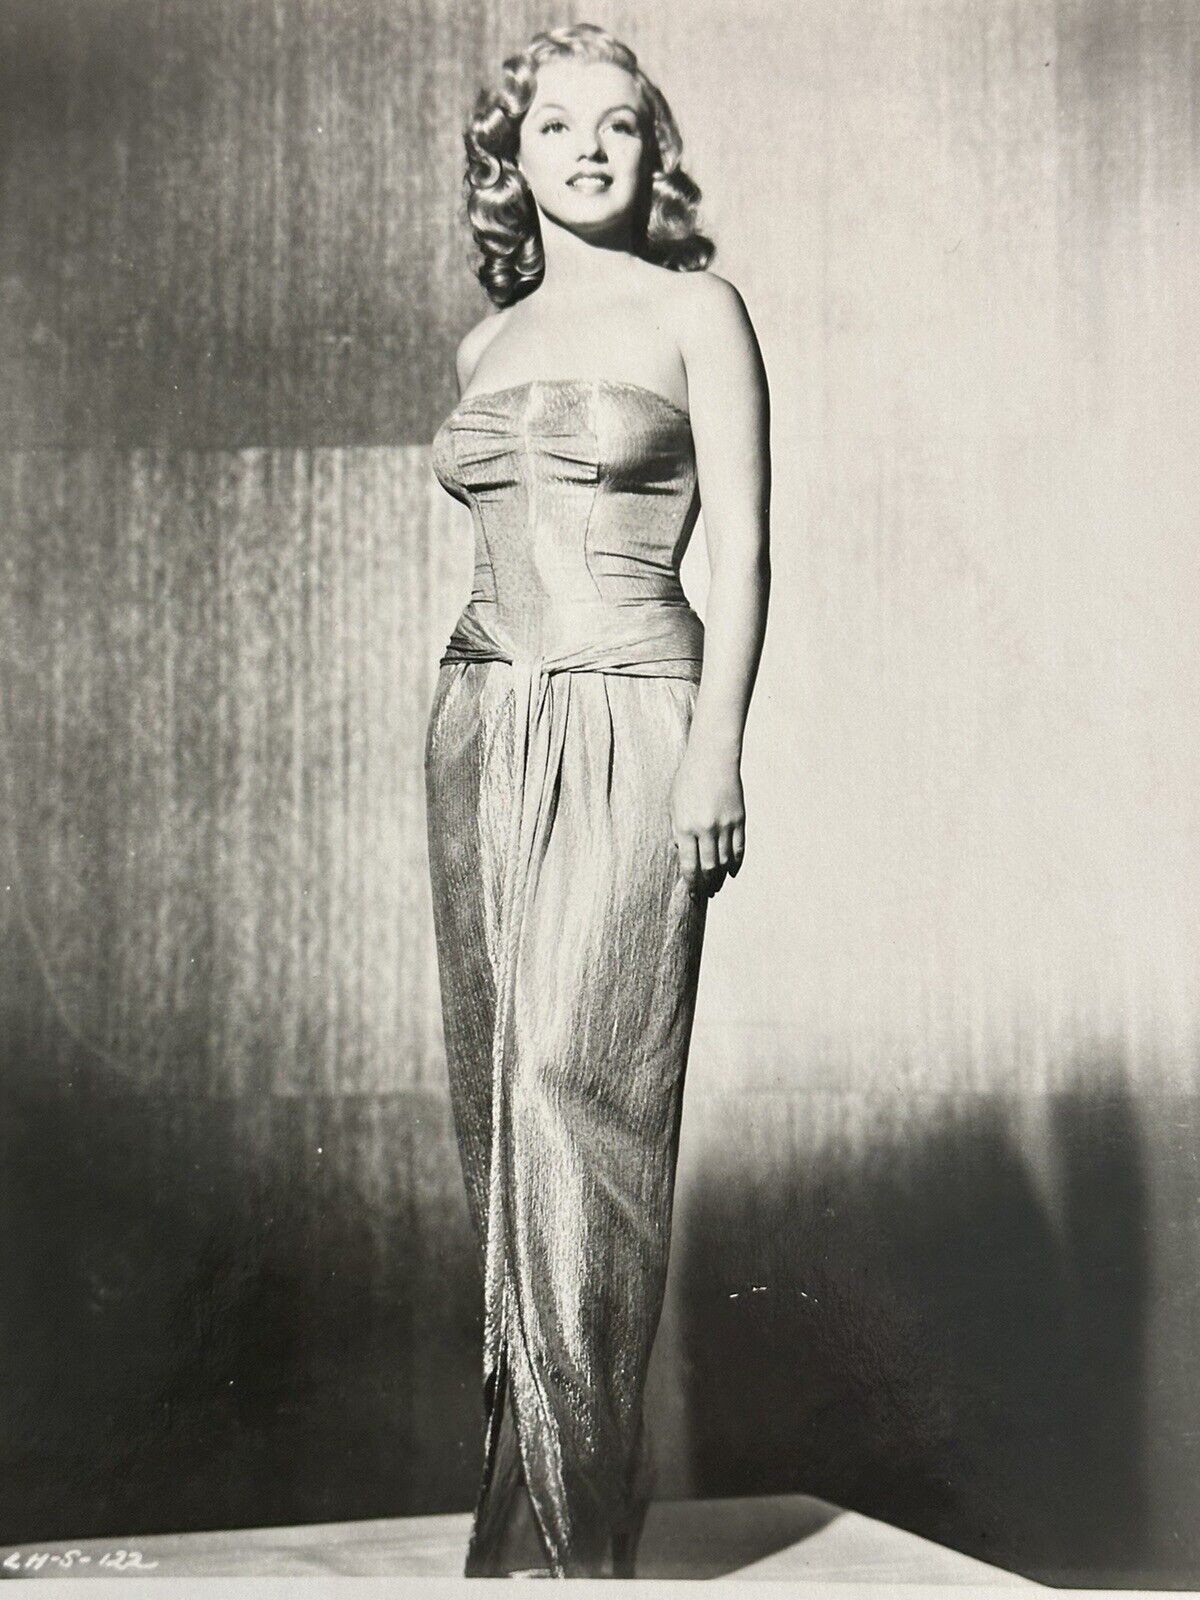 RARE YOUNG MARILYN MONROE ORIGINAL TYPE 1 PHOTO - 8X10 BARE SHOULDERS 1940\'S